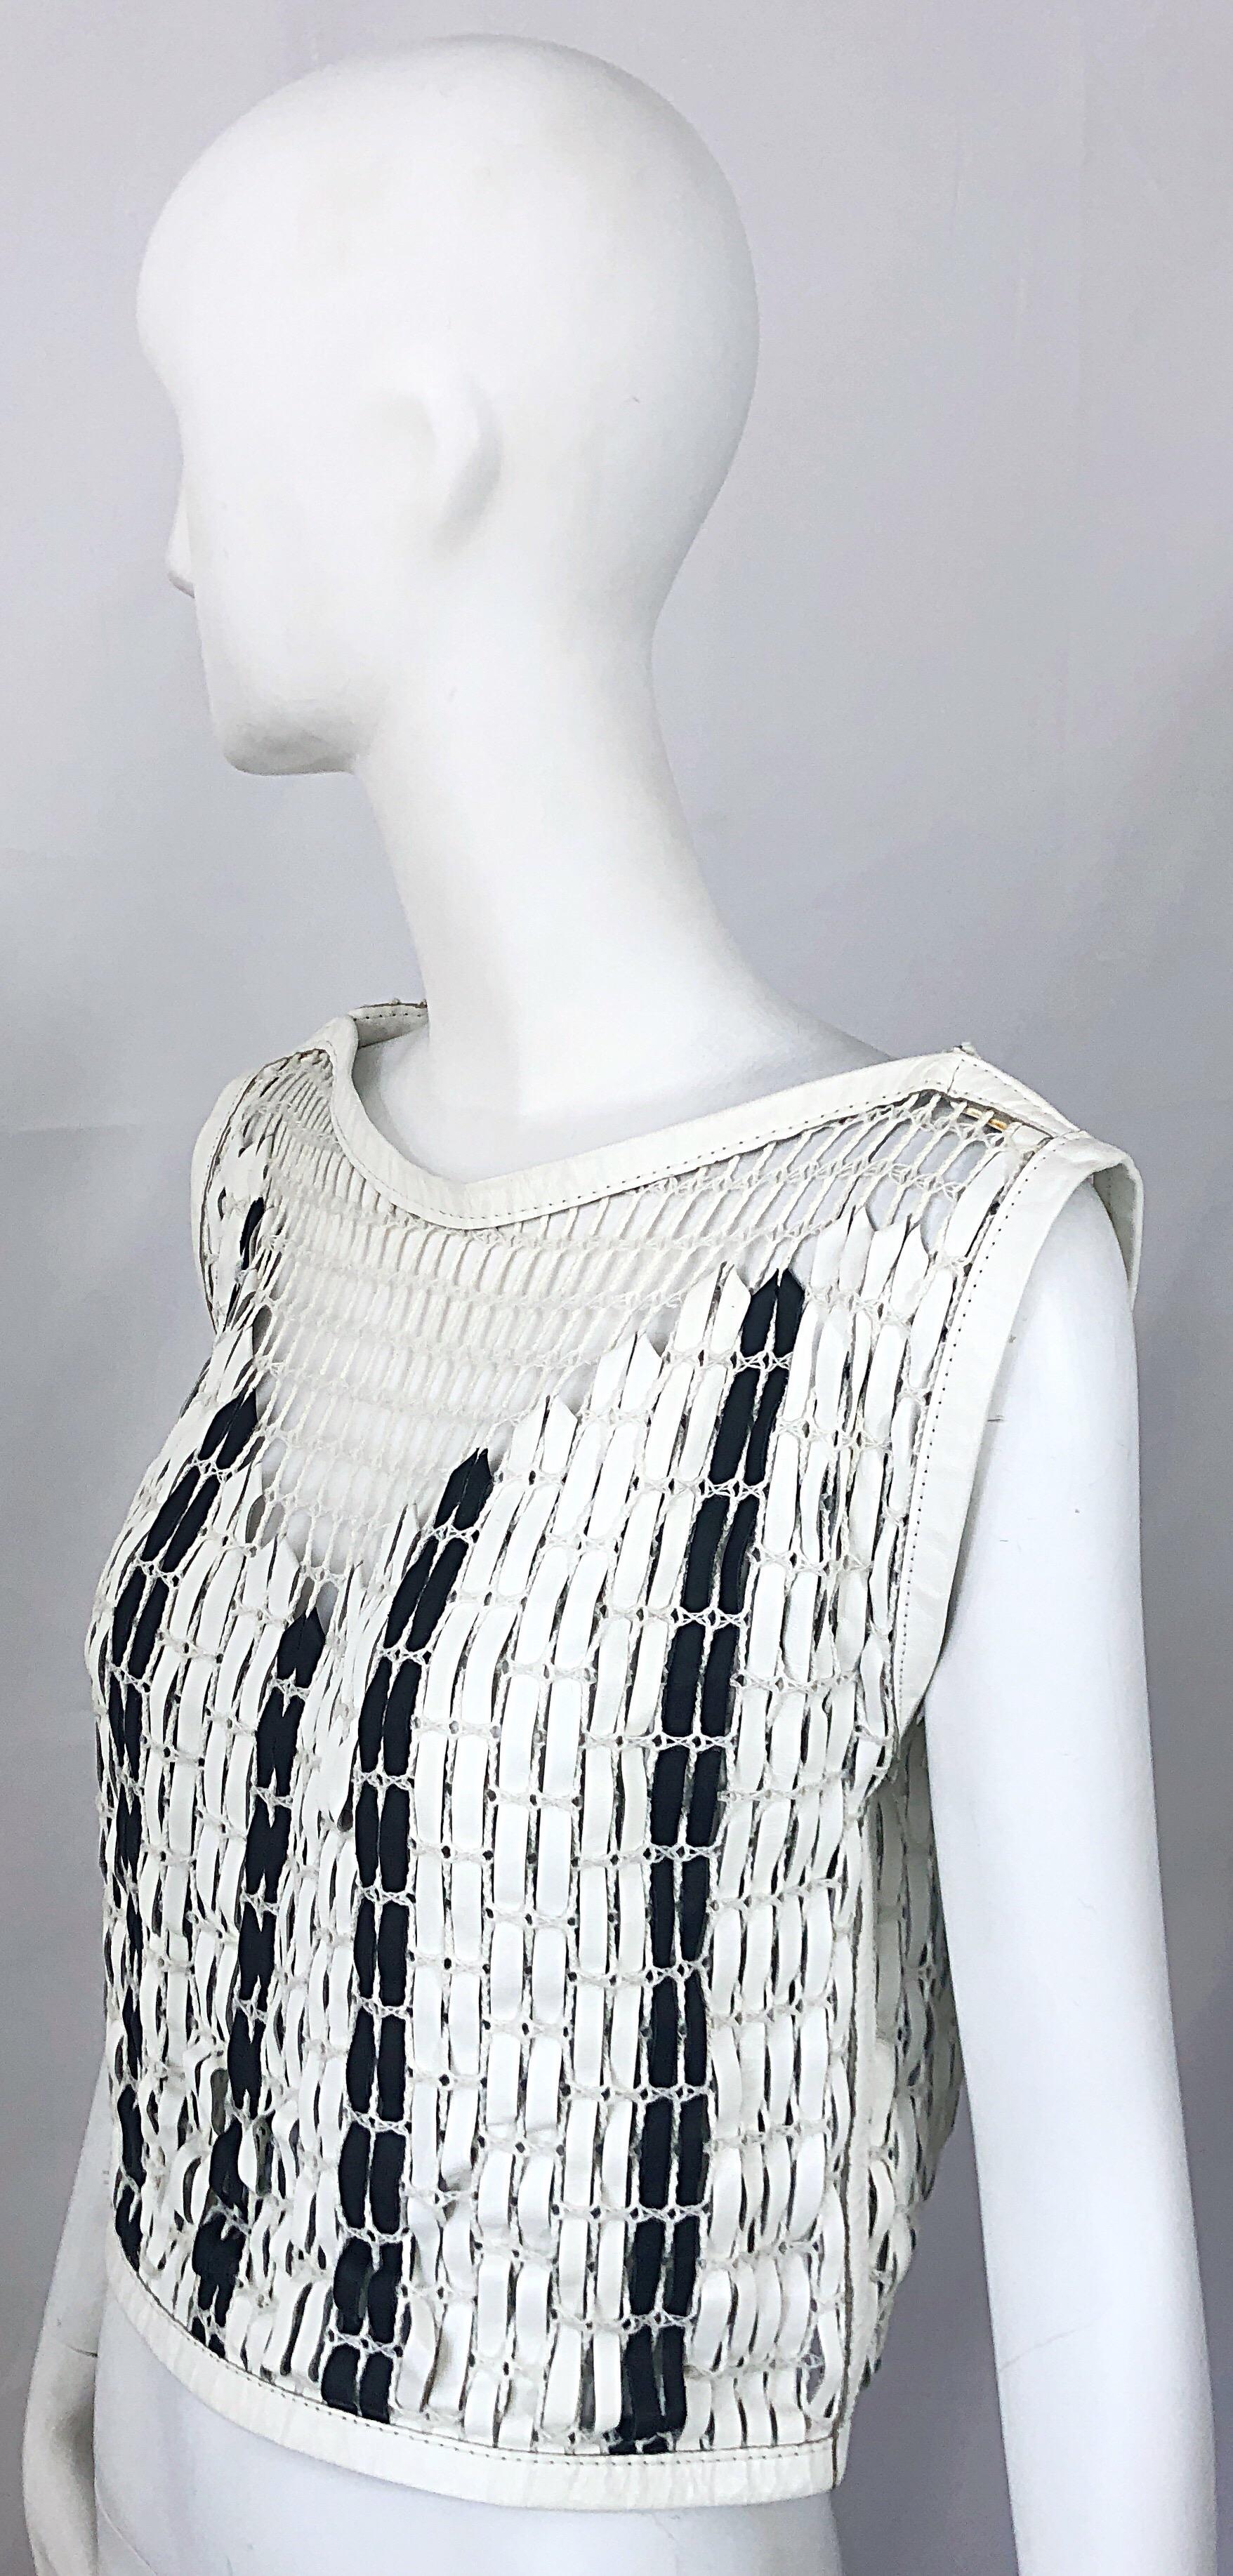 Bottega Veneta 2000s Black and White Leather Cotton Fishnet Avant Garde Crop Top In Good Condition For Sale In San Diego, CA